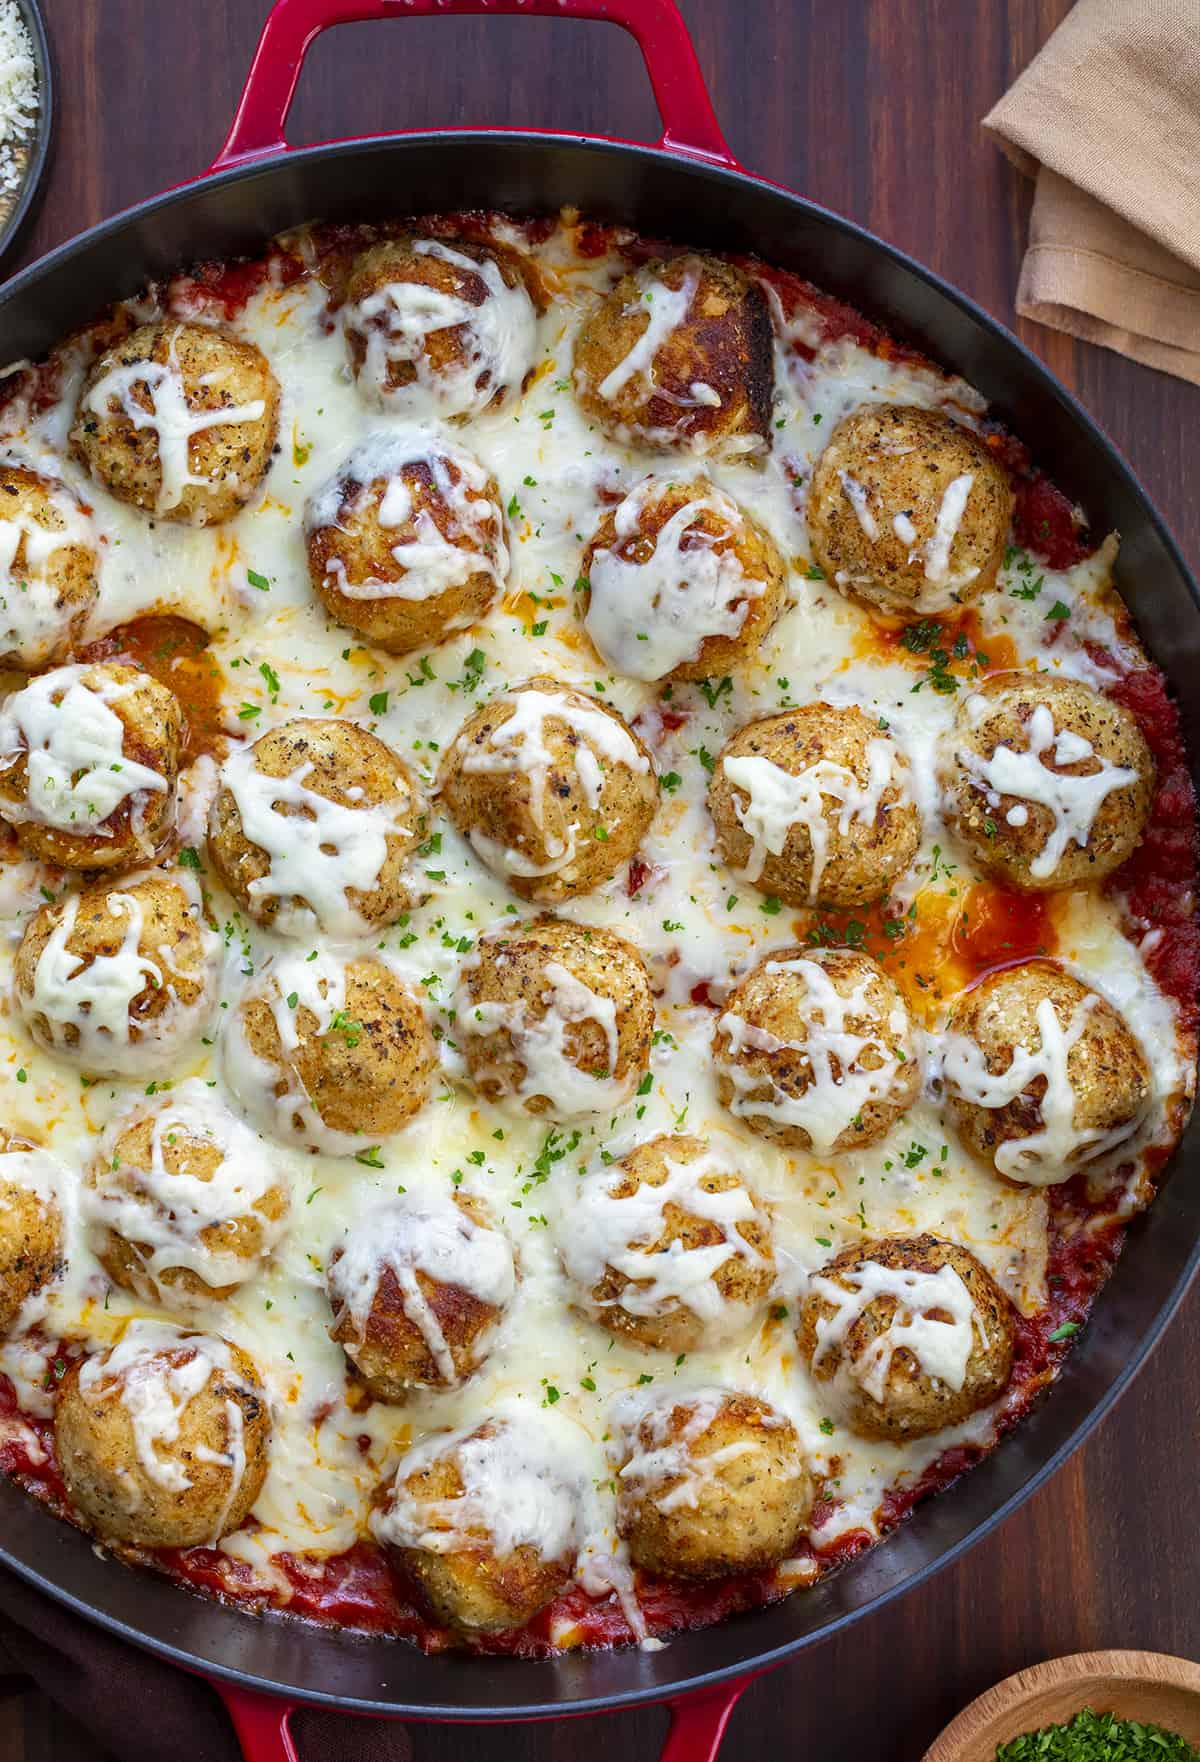 Skillet of Chicken Parmesan Meatballs with Cheese. Dinner, Supper, Meatballs, Chicken Meatballs, Chicken Parmesan Meatballs, Chicken Meatball Recipes, Chicken, Chicken Recipes, Christmas Dinner, i am homesteader, iamhomesteader